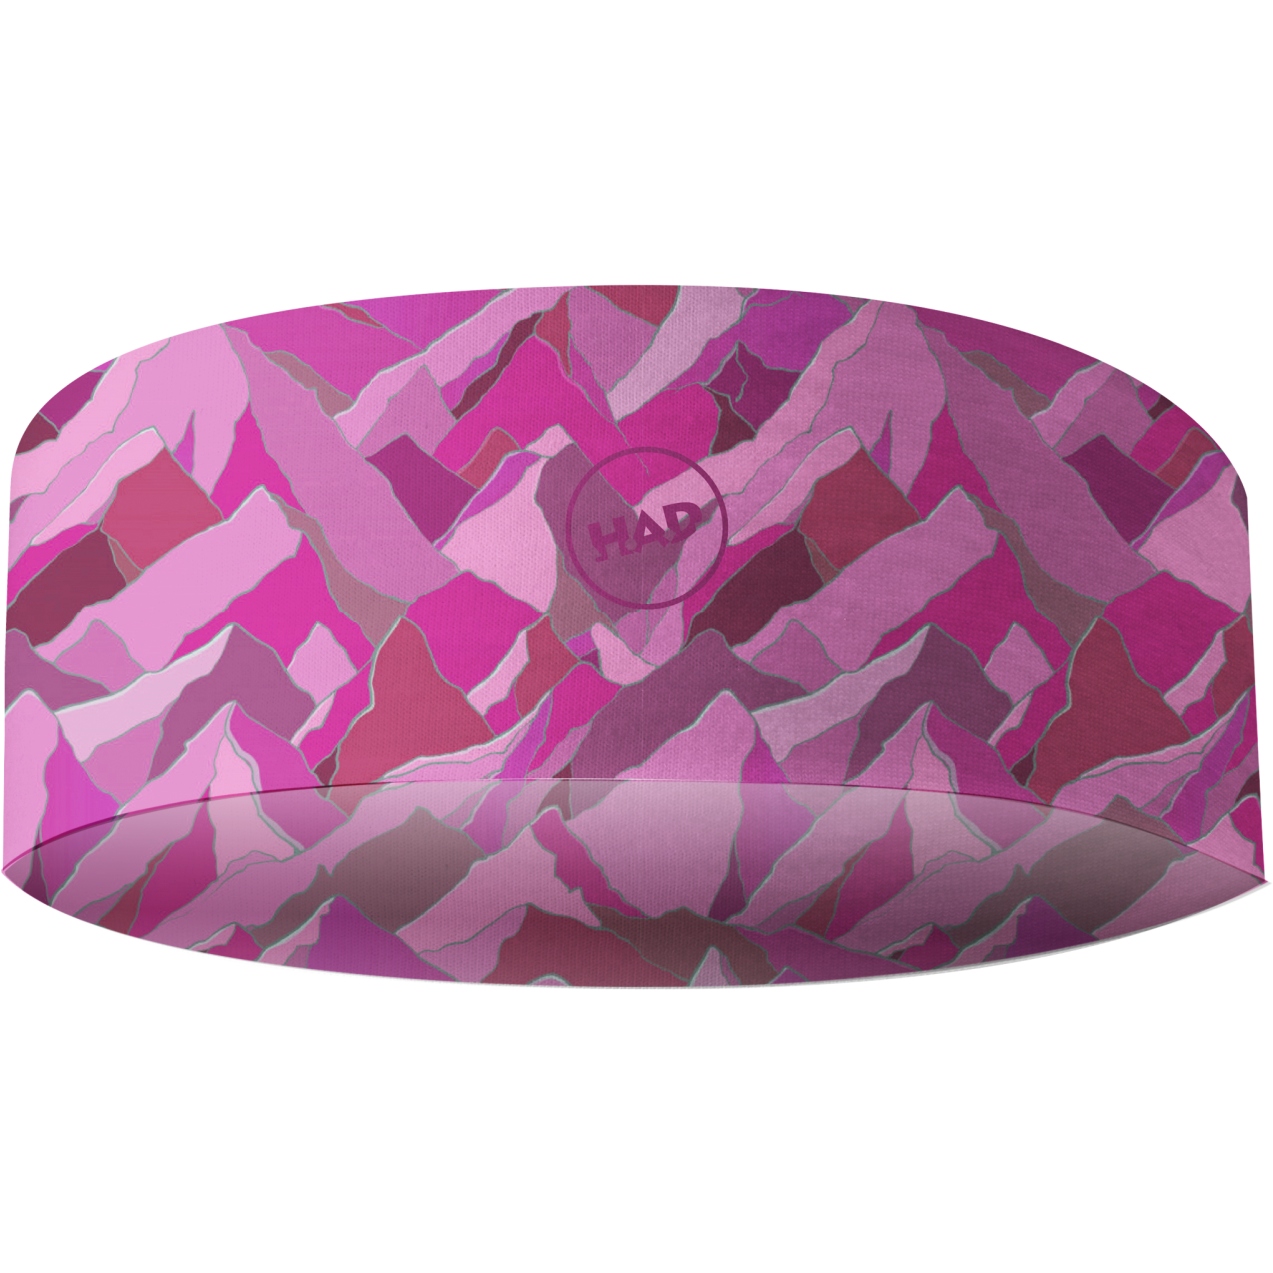 Picture of H.A.D. Bonded HADband Headband - Montana Pink